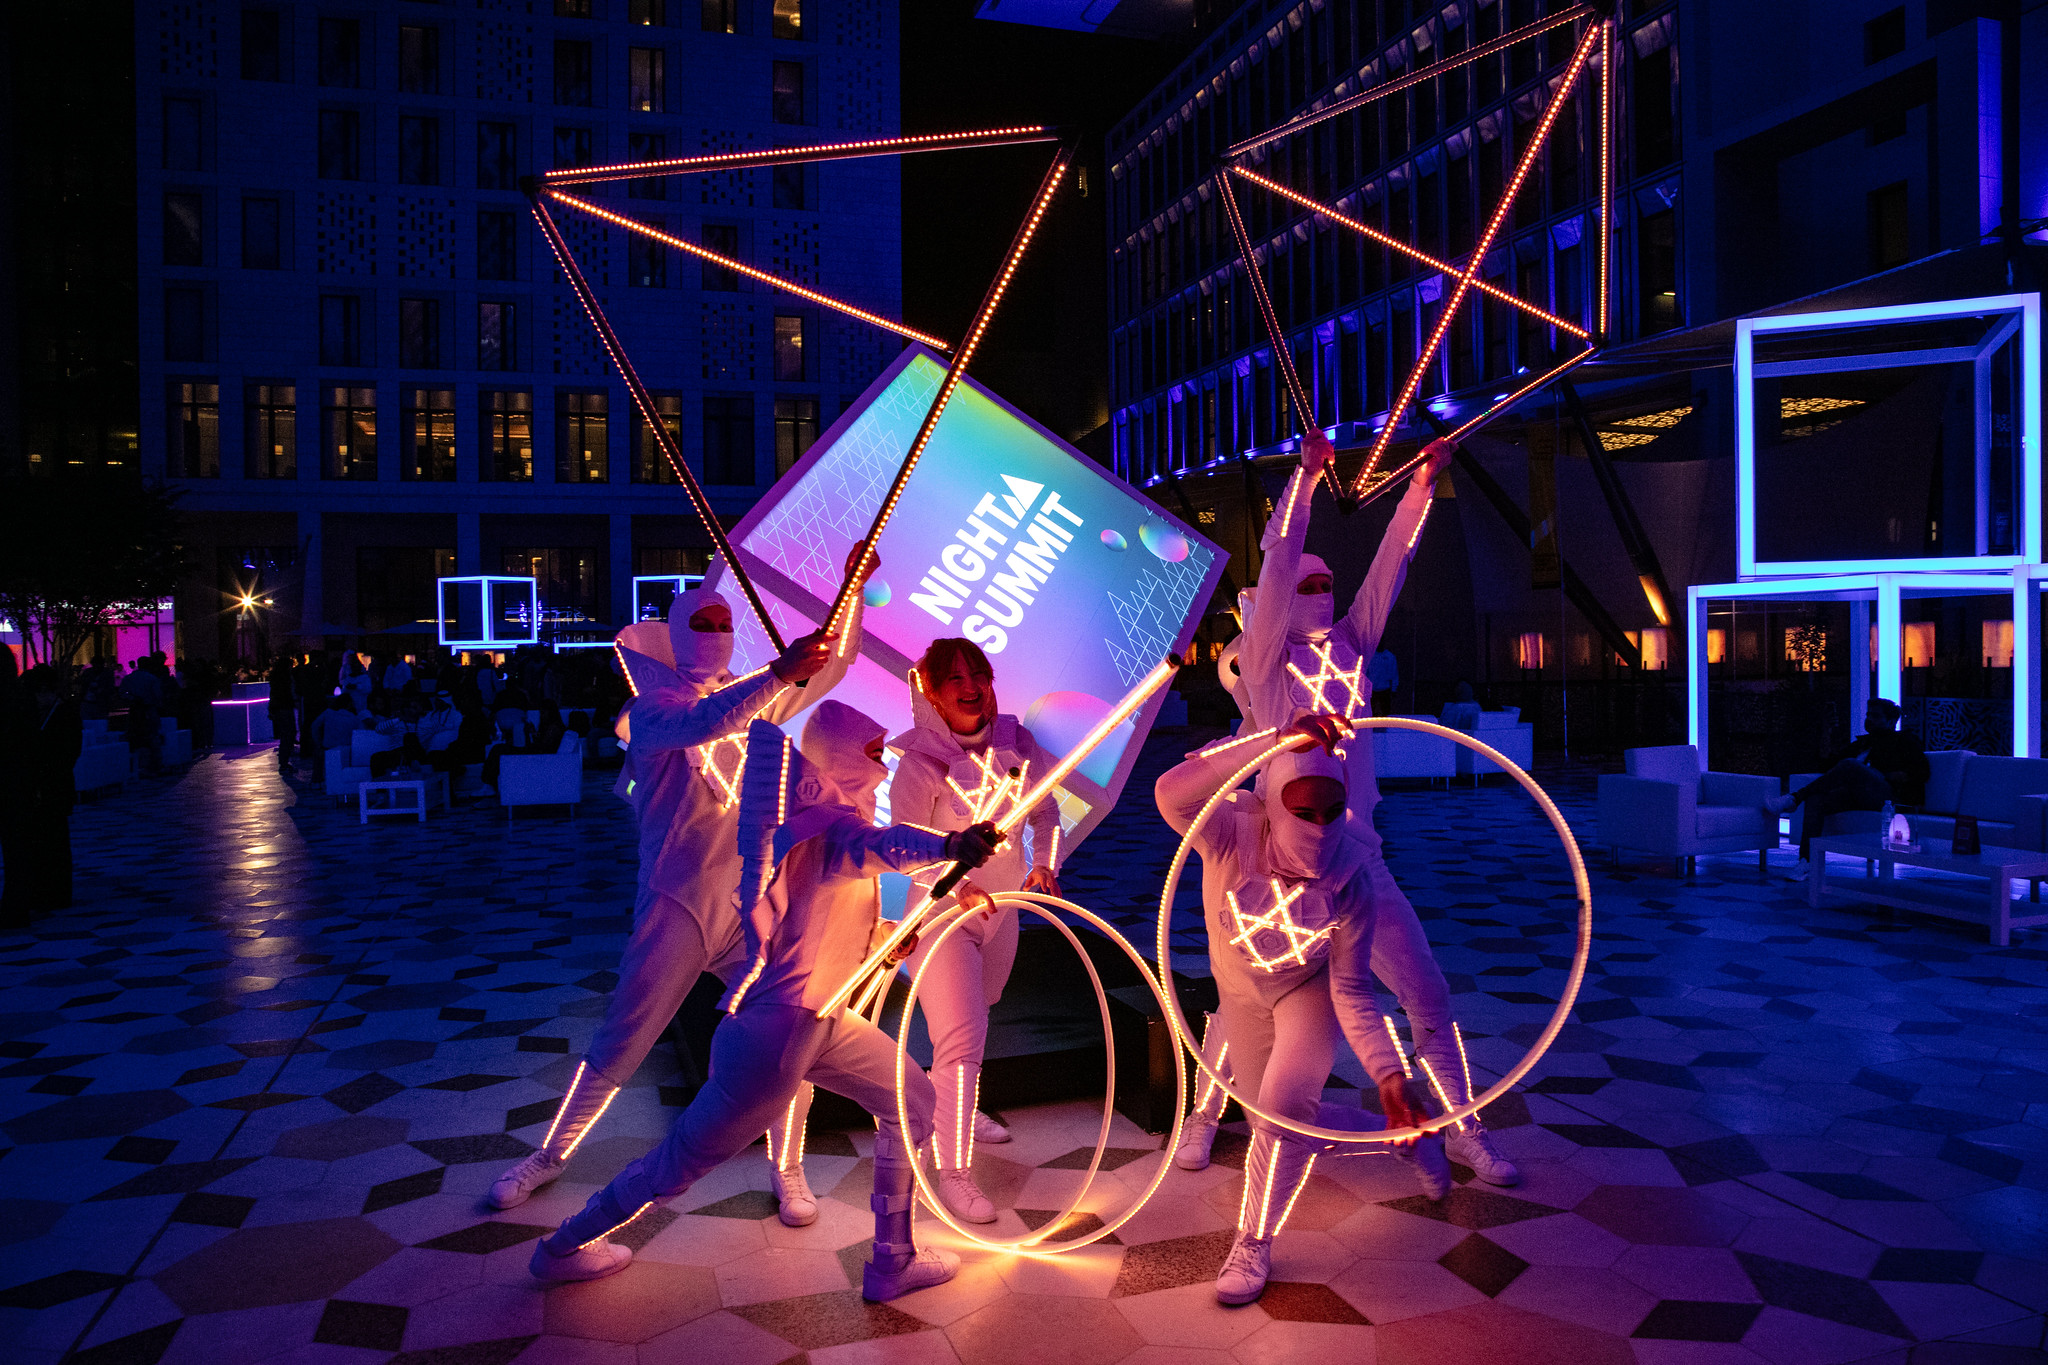 A photograph of a live art installation at Night Summit in Qatar, at Barahat Msheireb. There are five people holding up 3D shapes, dressed in all-white suits. There are light installations visible in the background.